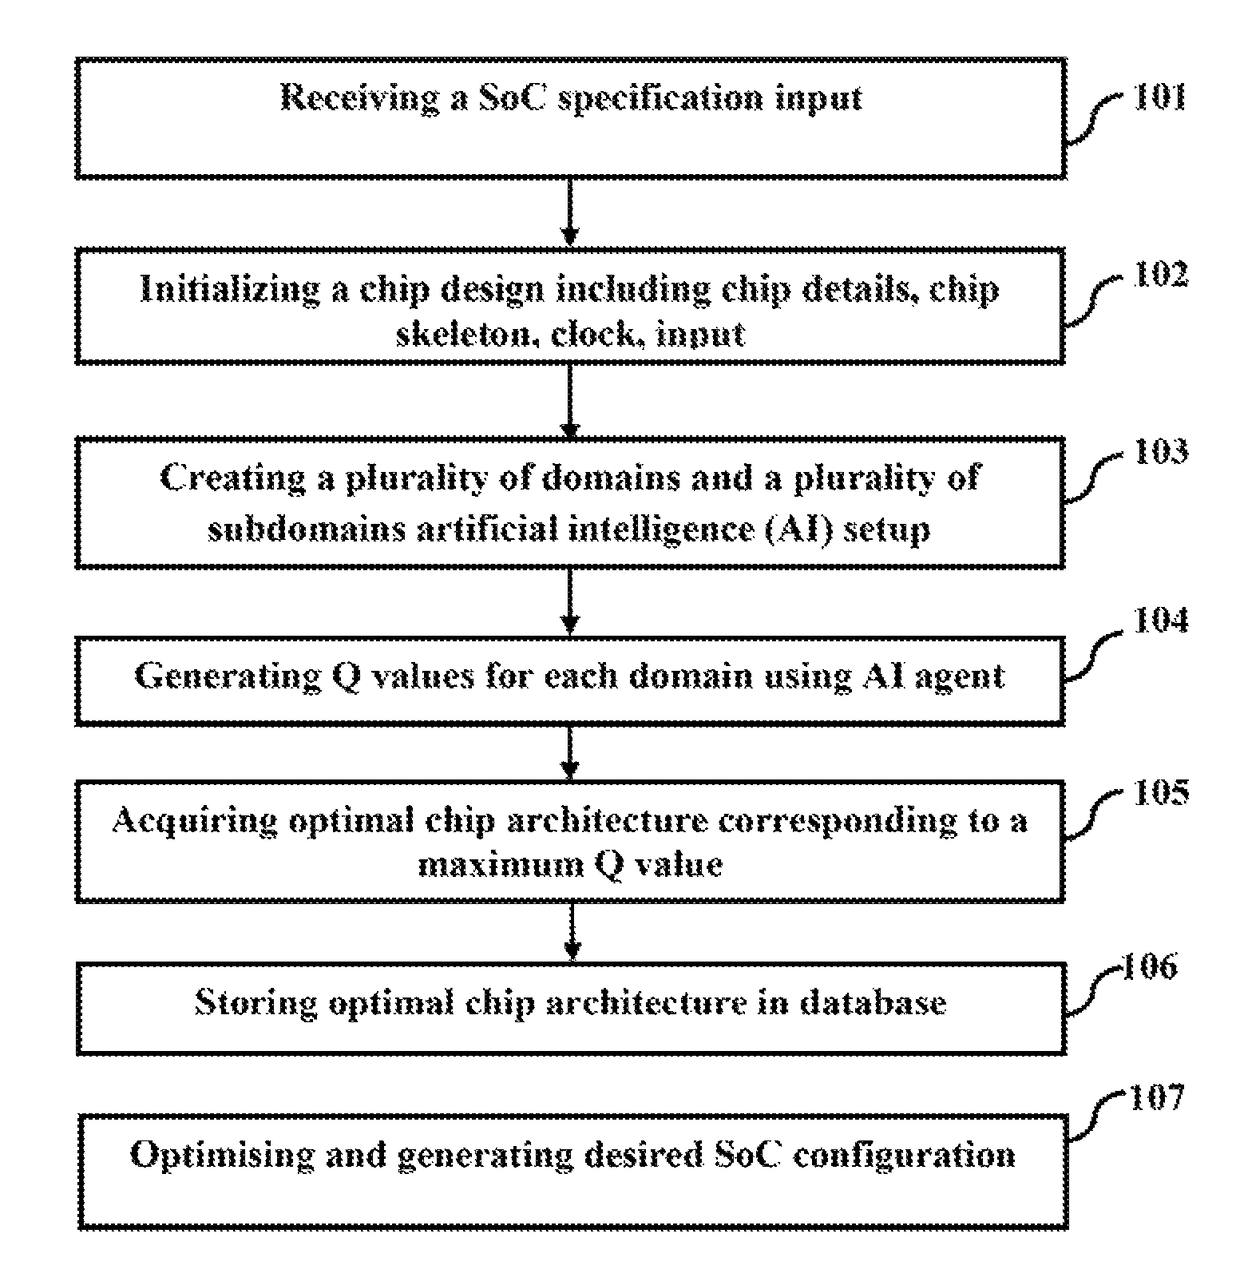 System and method for designing system on chip (SoC) circuits through artificial intelligence and reinforcement learning